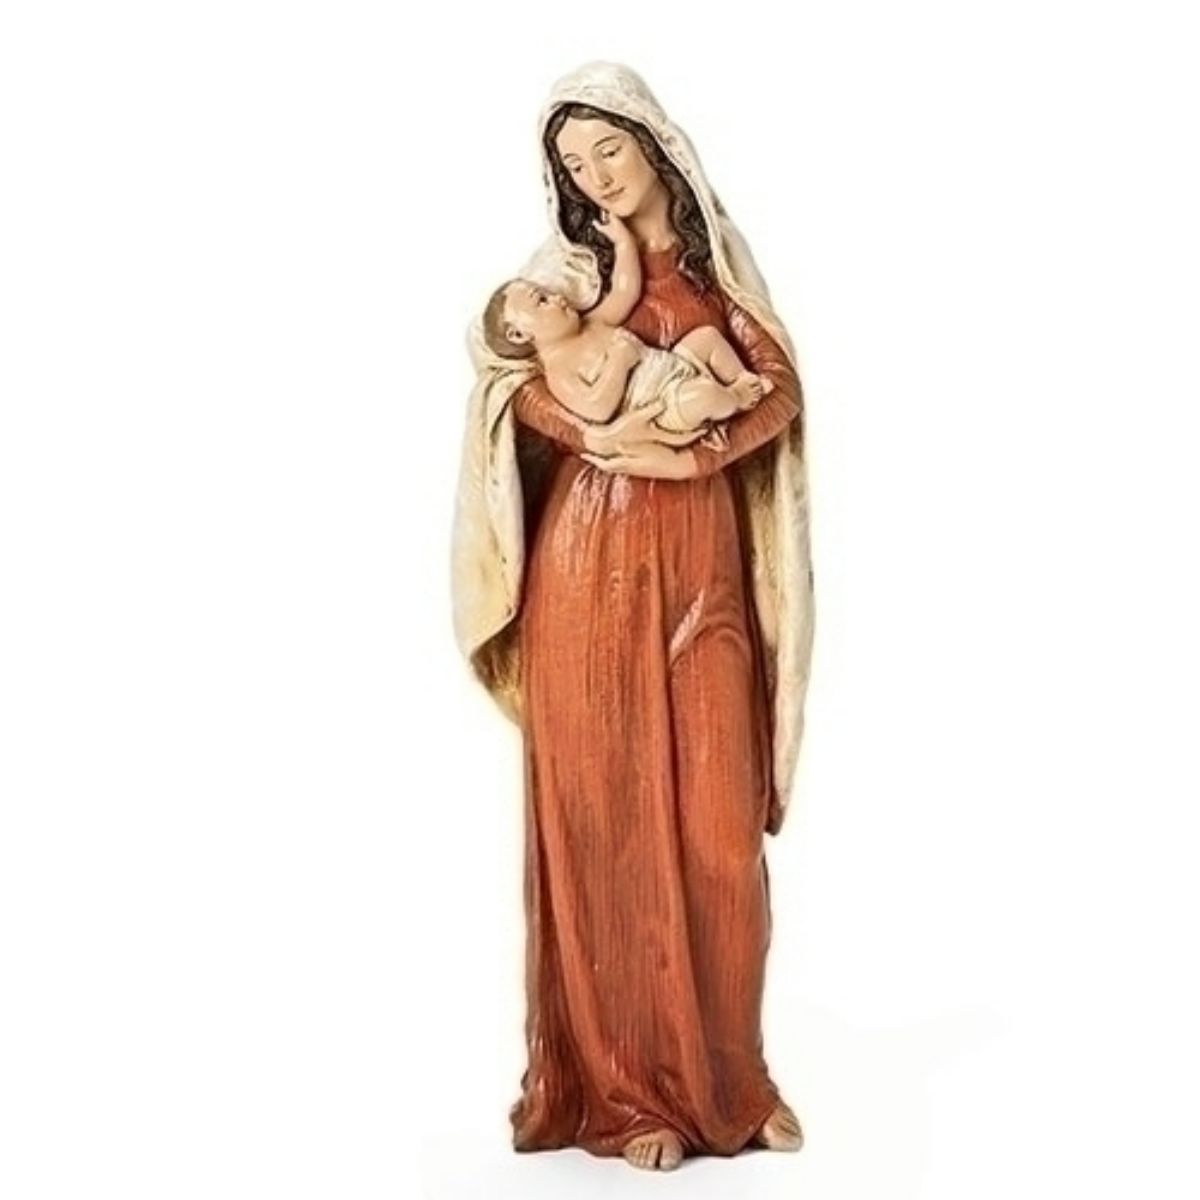 Joseph's Studio Renaissance Collection Catholic Statues, Crucifixes, Garden and Gift Products, by Roman Inc